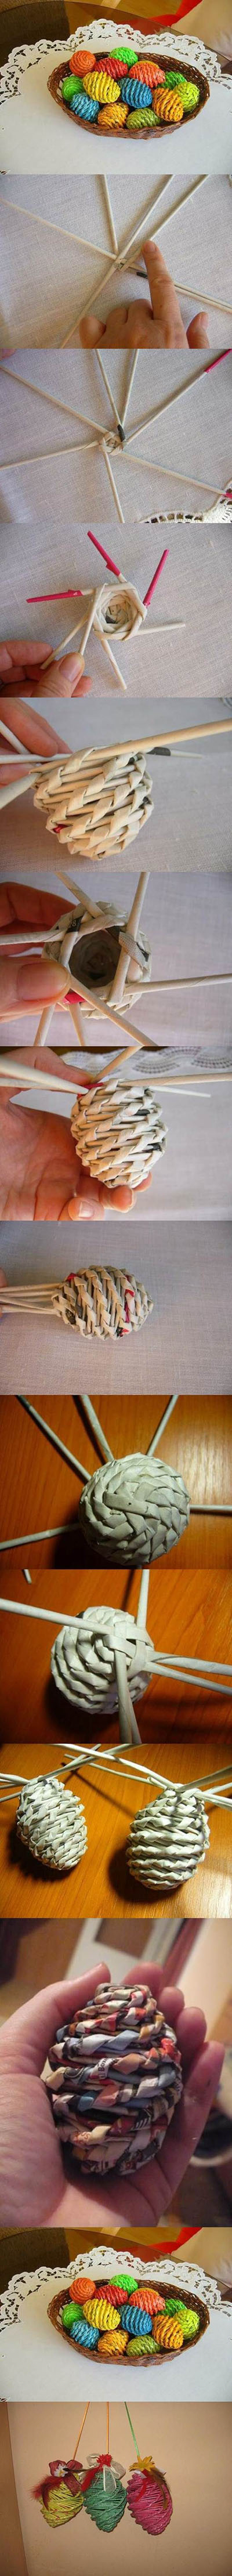 18 DIY Woven Paper Easter Eggs 099a